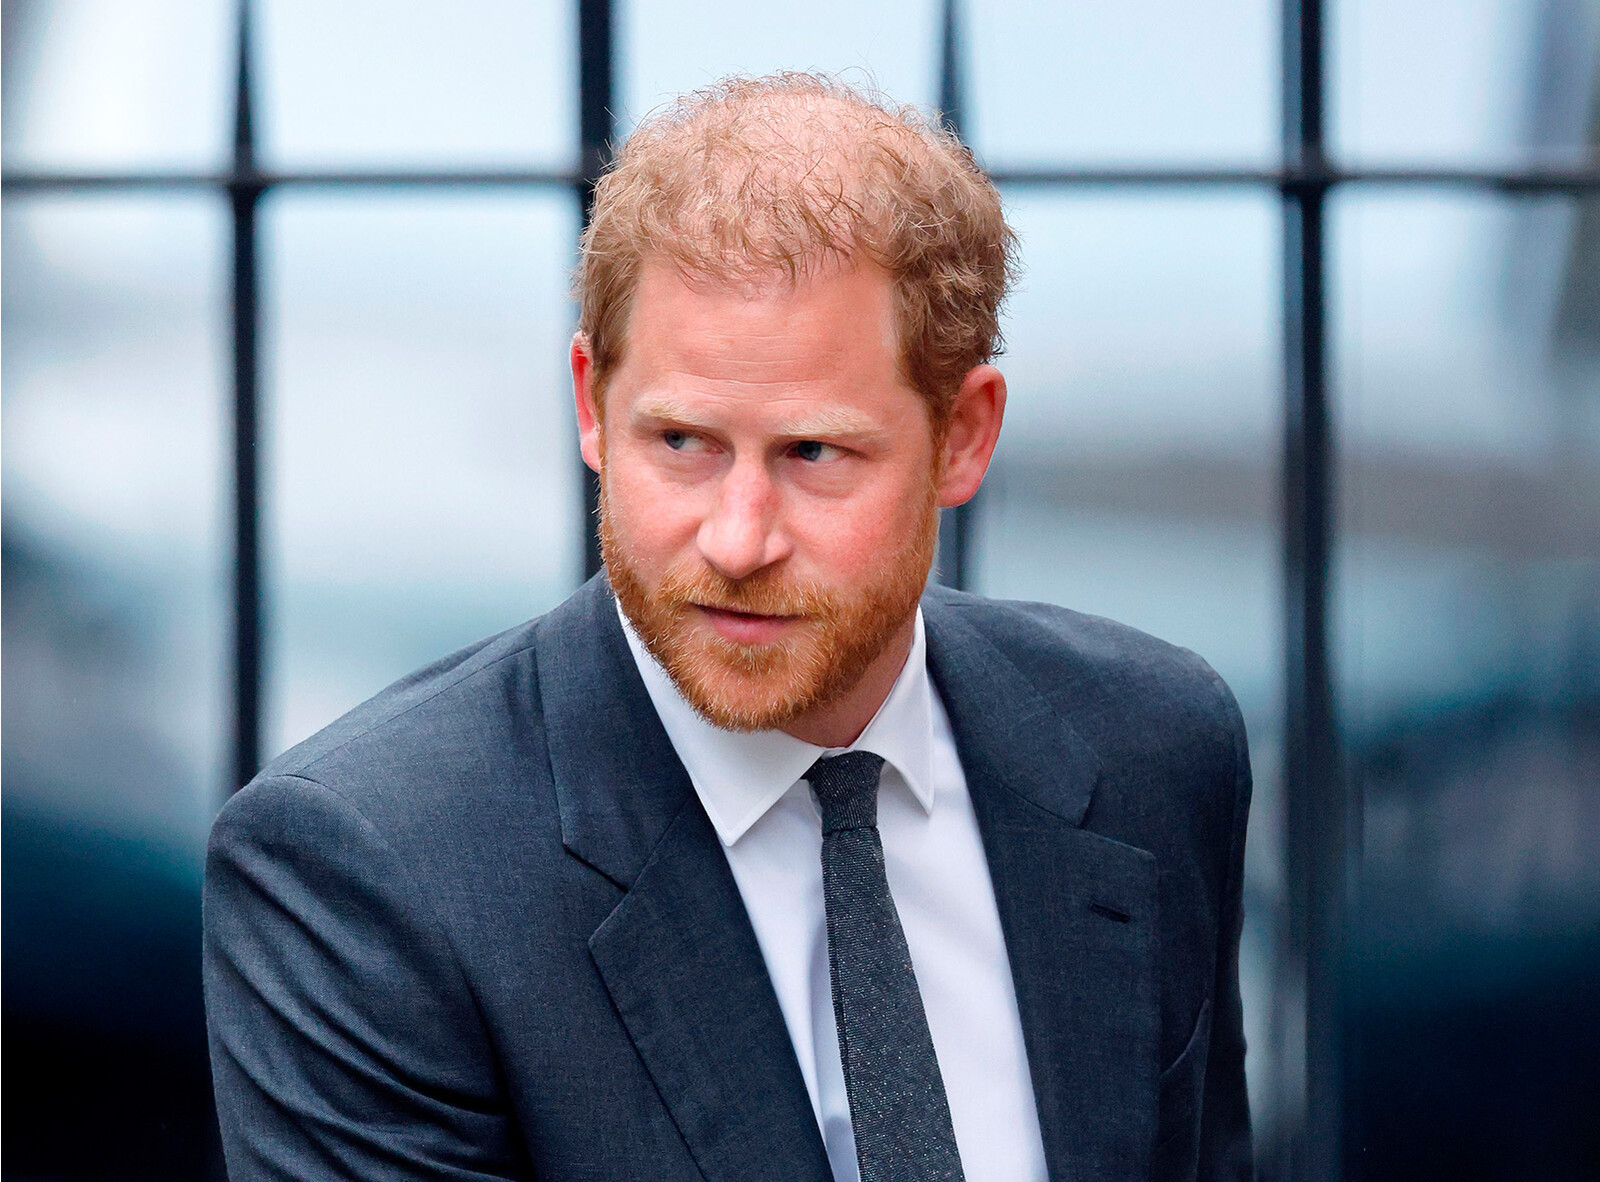 Prince-Harry-lost-court-case-0523-01-Mainstyle.jpg